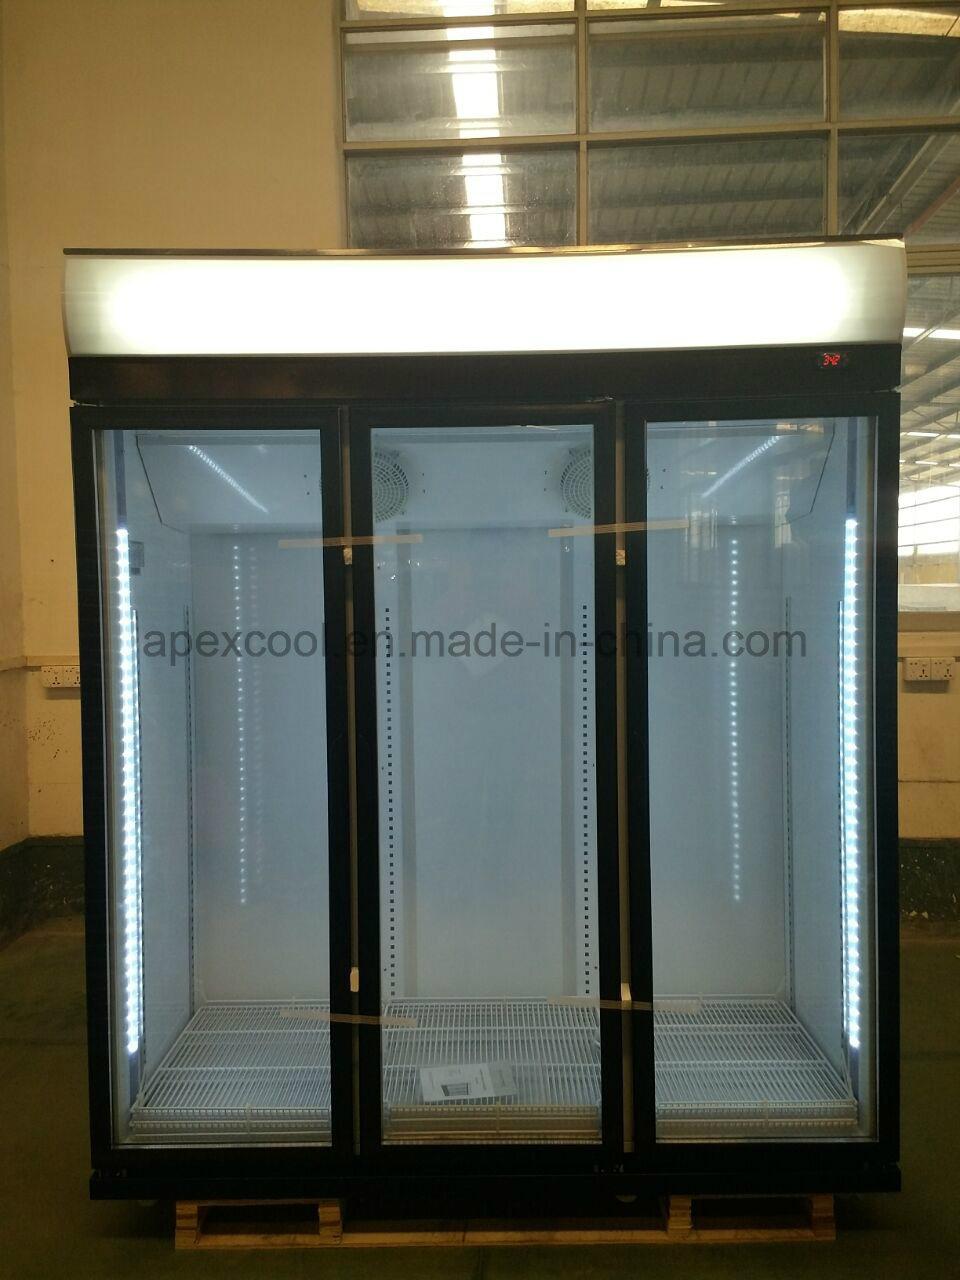 Glass Three Door Upright Showcase with Top Compressor System